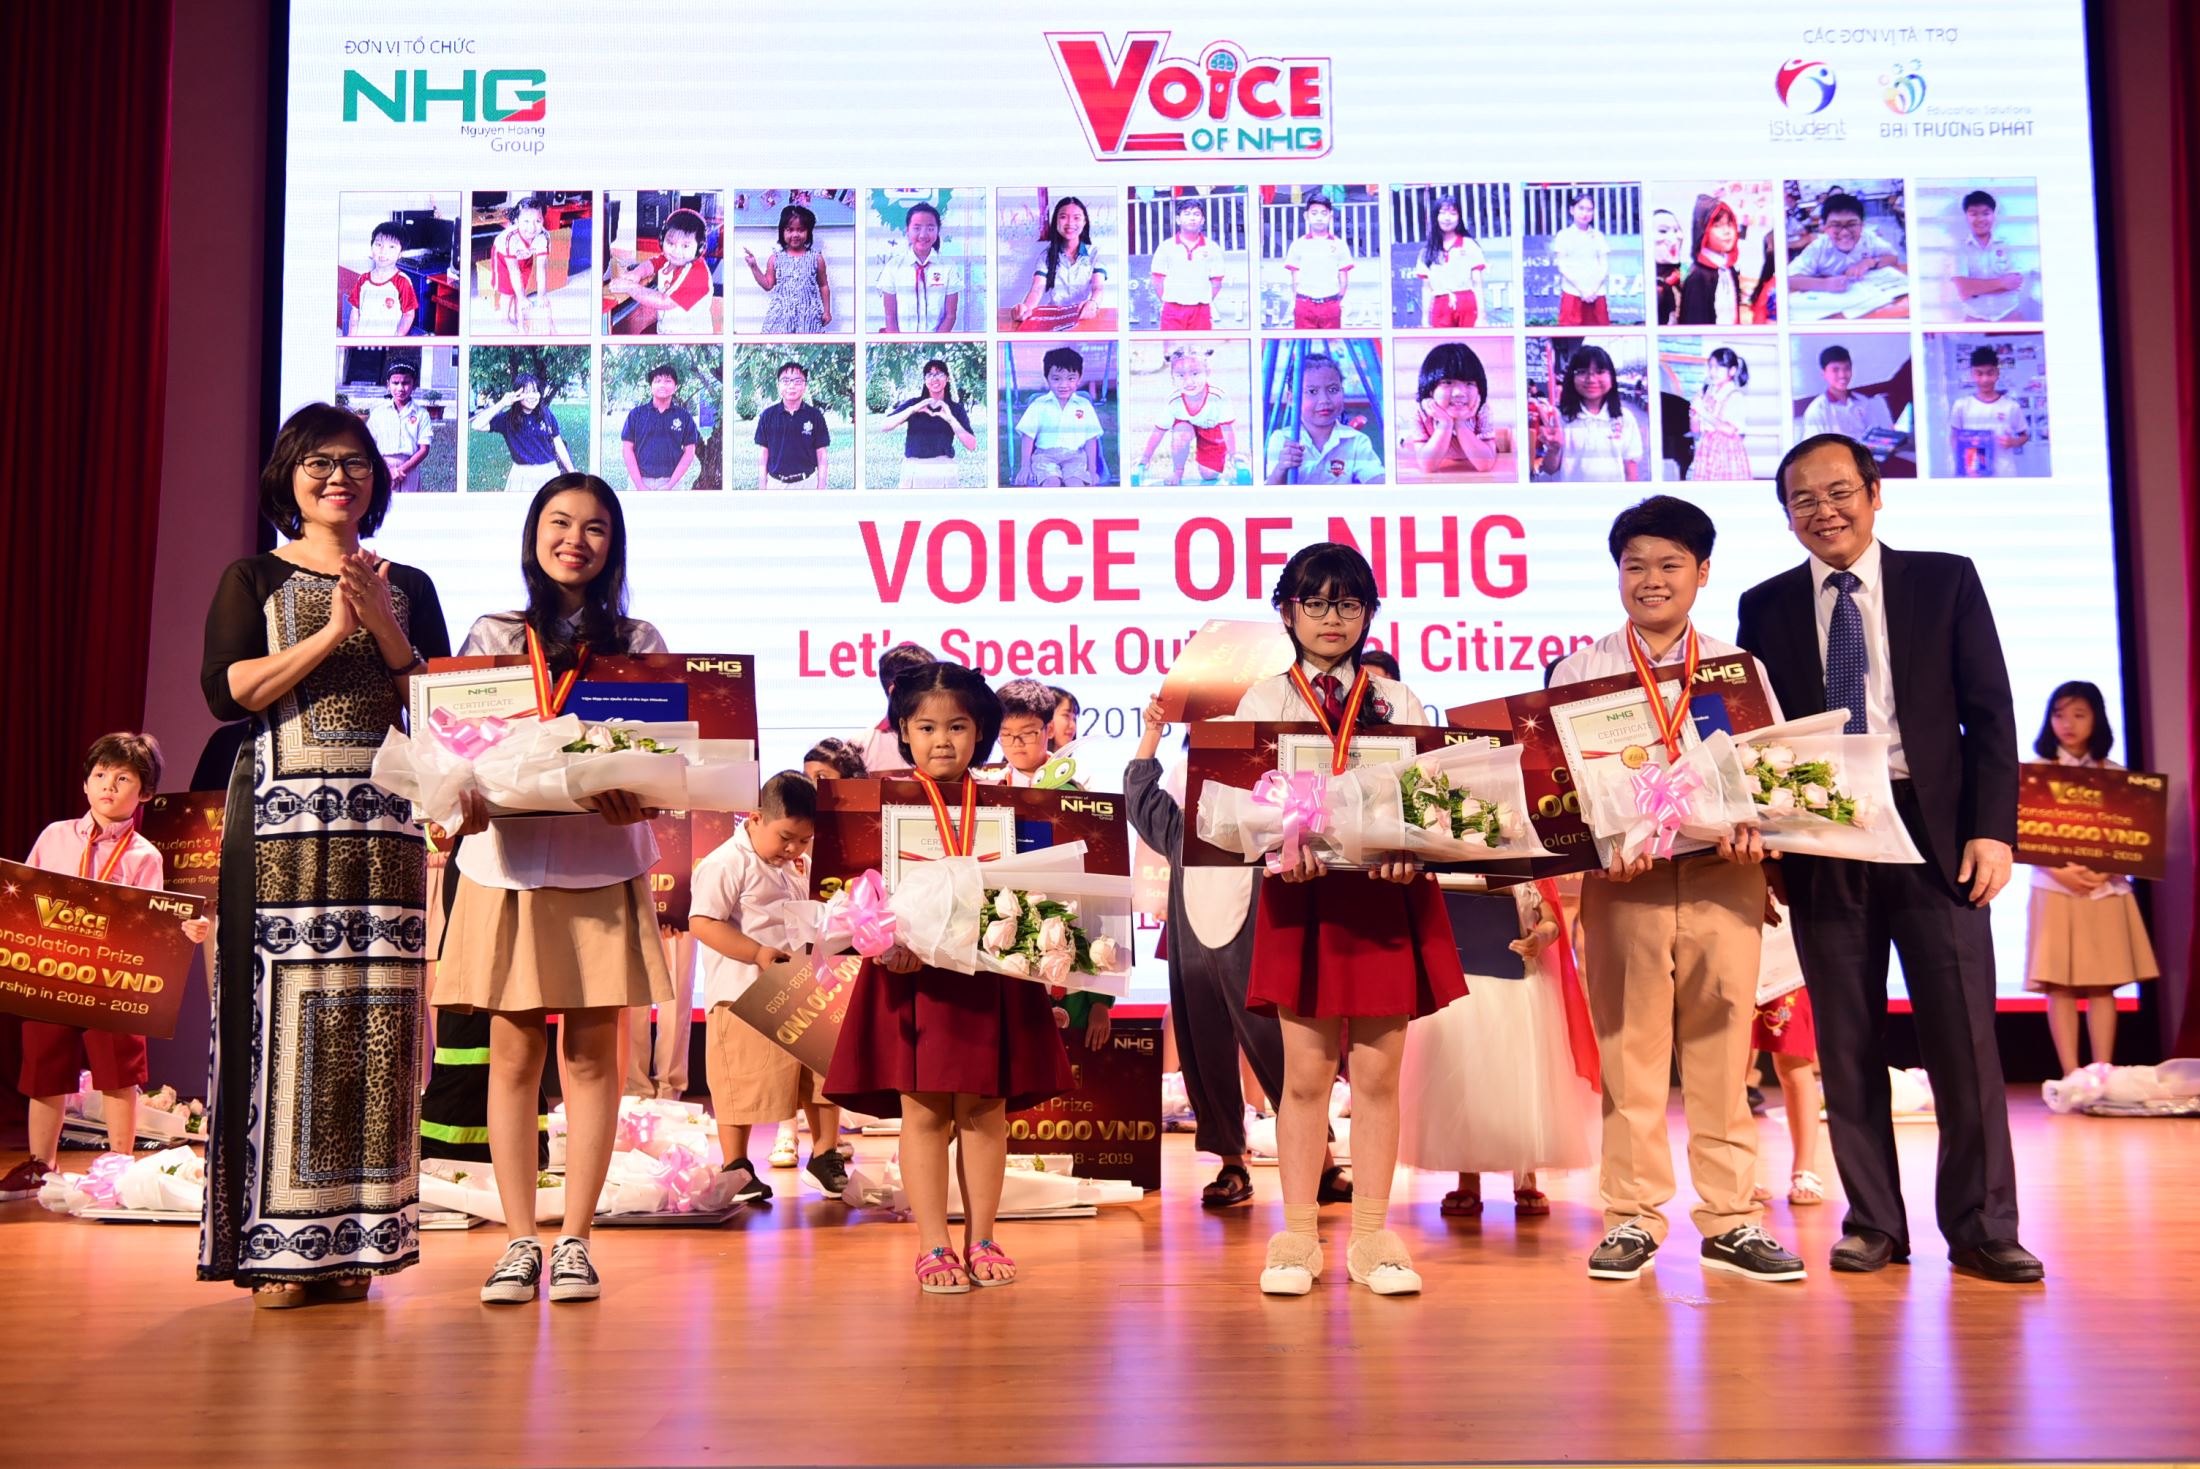 Ms. Dang Thi Thuy Linh – Deputy of Testing and Education Quality Assurance, HCMC Department of Education and Training and Dr. Do Manh Cuong – Permanent Member of Education Council, Academic Director, NHG to award Golden Medals to the “champions” of Voice of Nguyen Hoang 2017 - 2018: Vu Song Thu from SGA Bui Thi Xuan, Ton Nu Cam Ngoc from SNA, Diep Minh Nhi from iSchool Long Xuyen